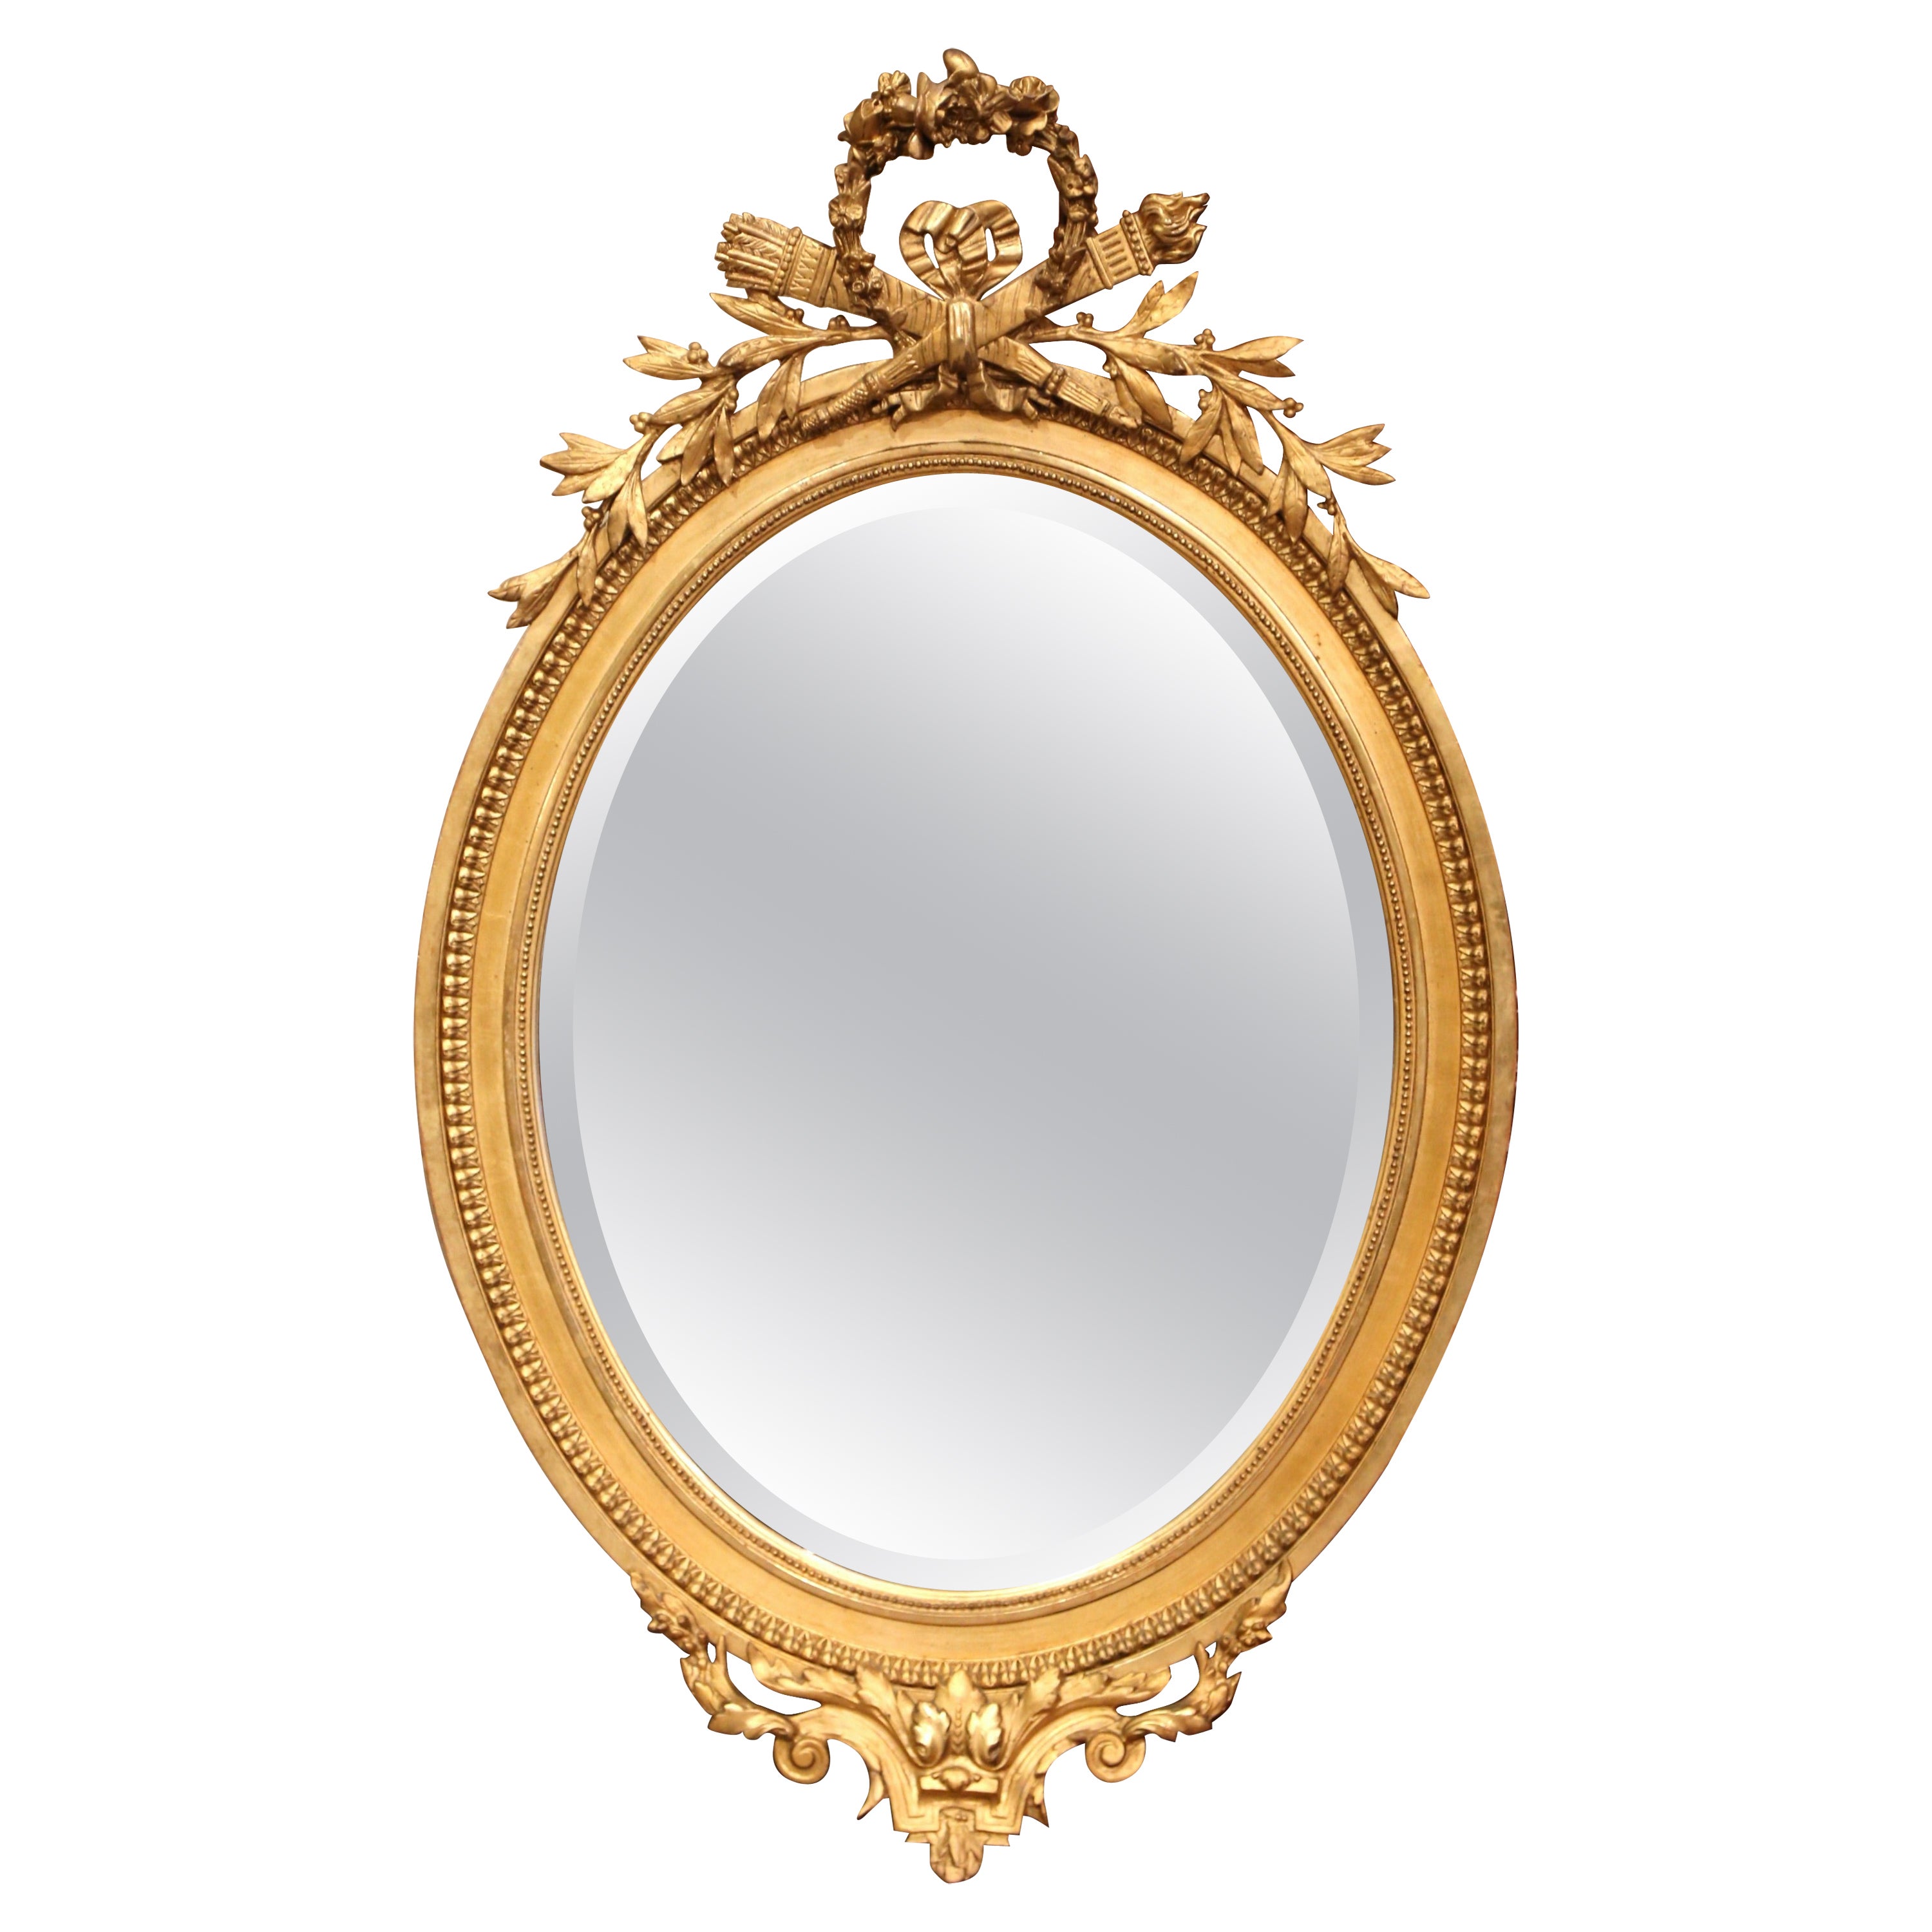 19th Century French Louis XVI Carved Giltwood Oval Beveled Glass Wall Mirror For Sale